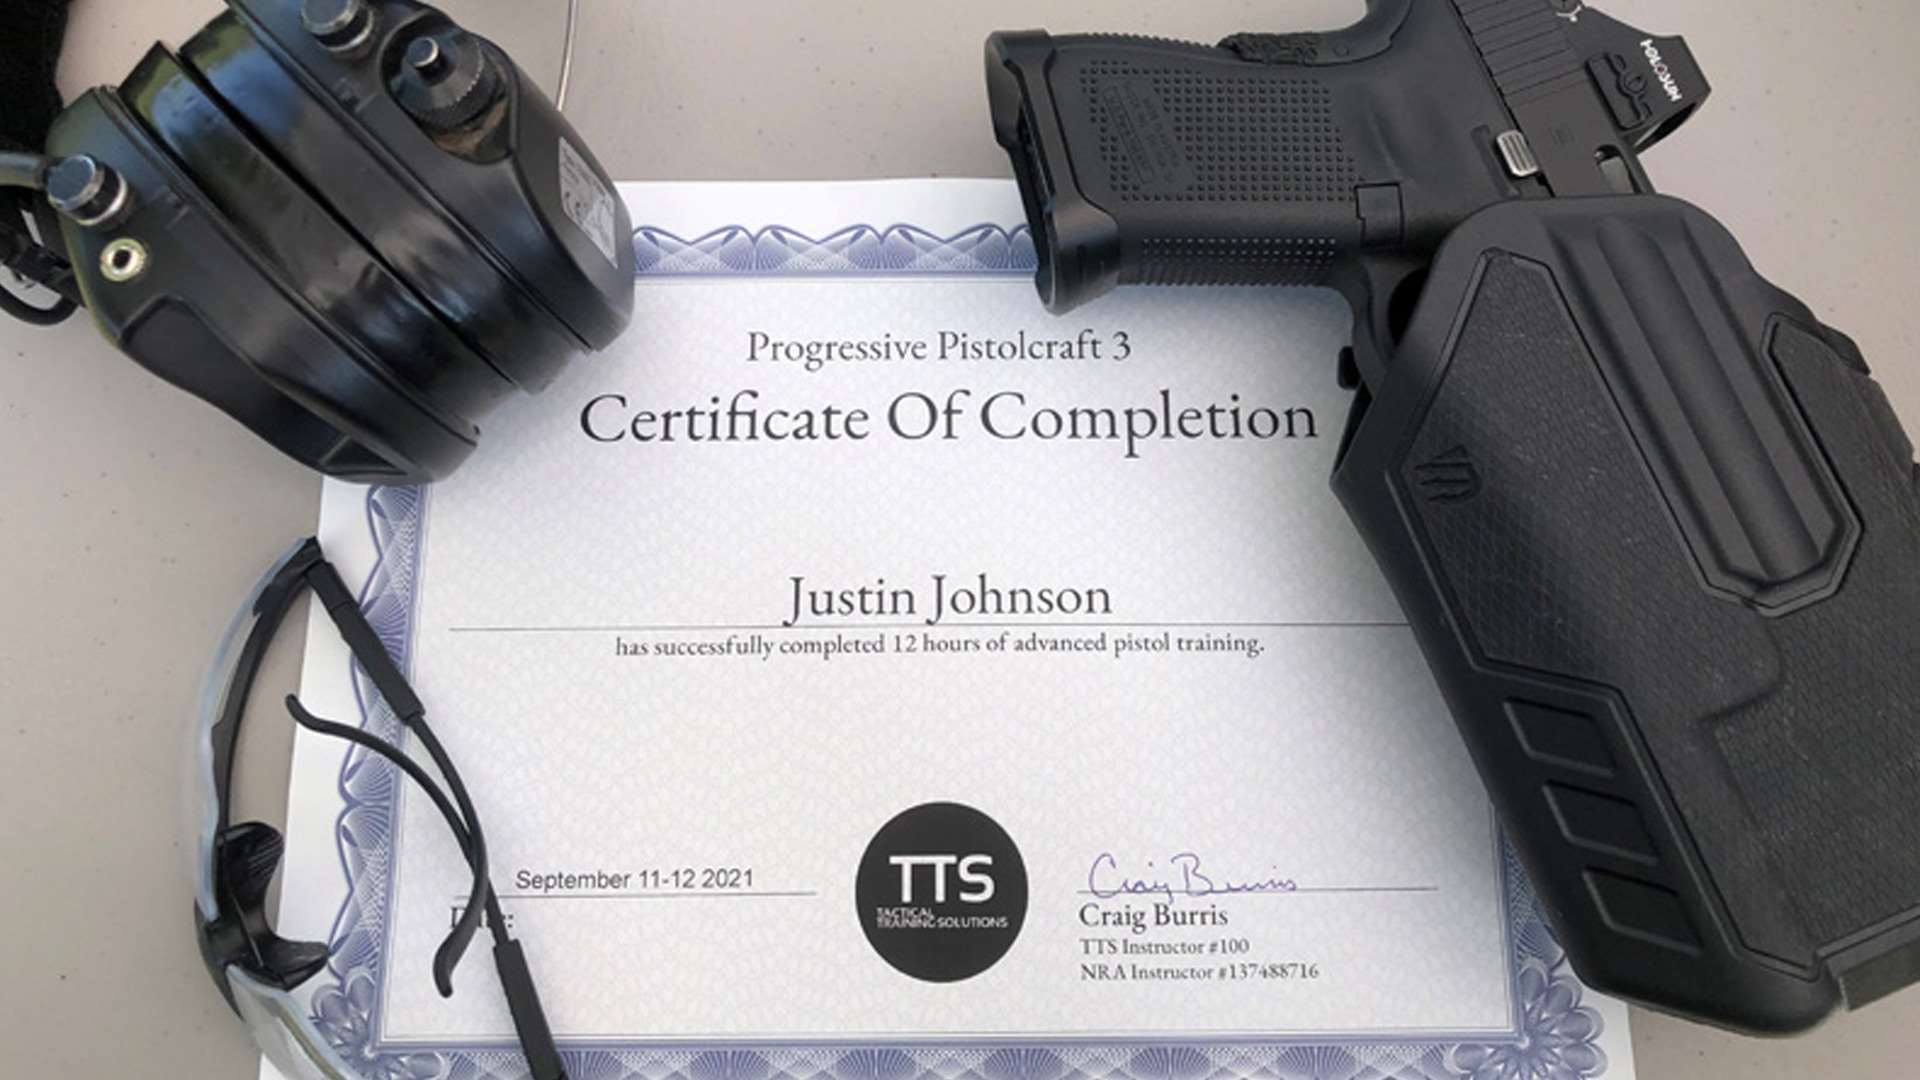 Justin Johnson and certificate